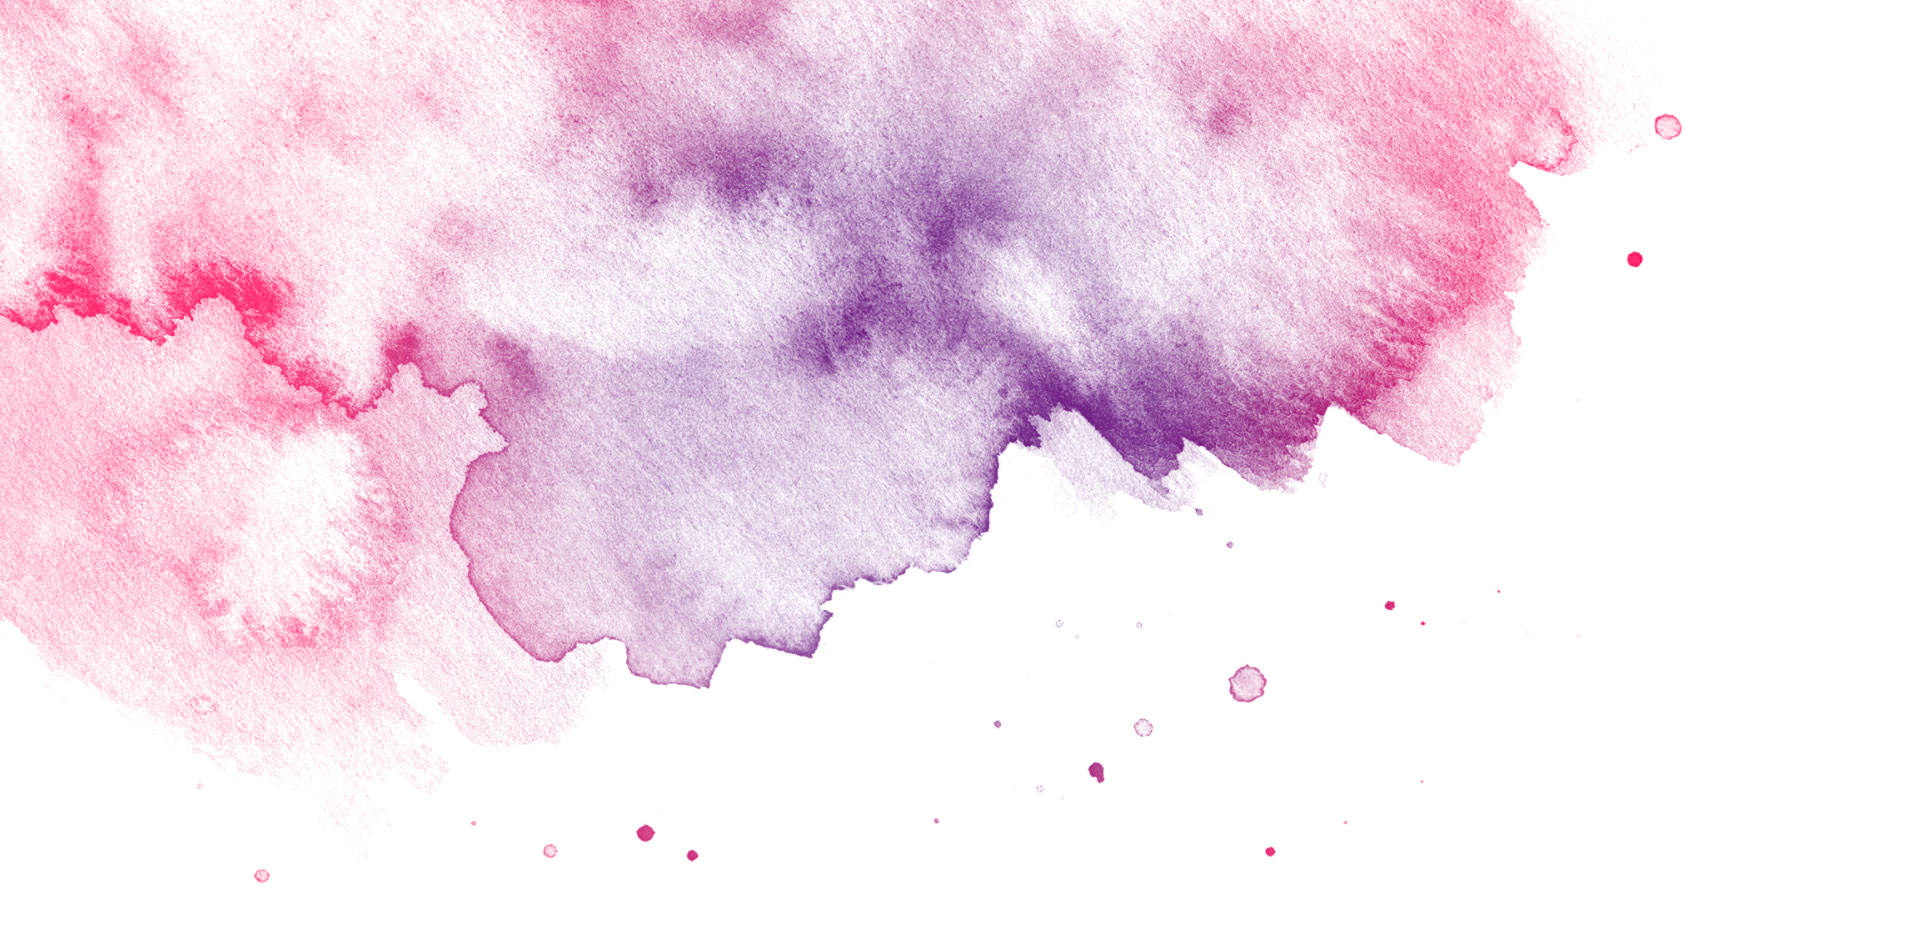 how to download watercolor brushes for photoshop